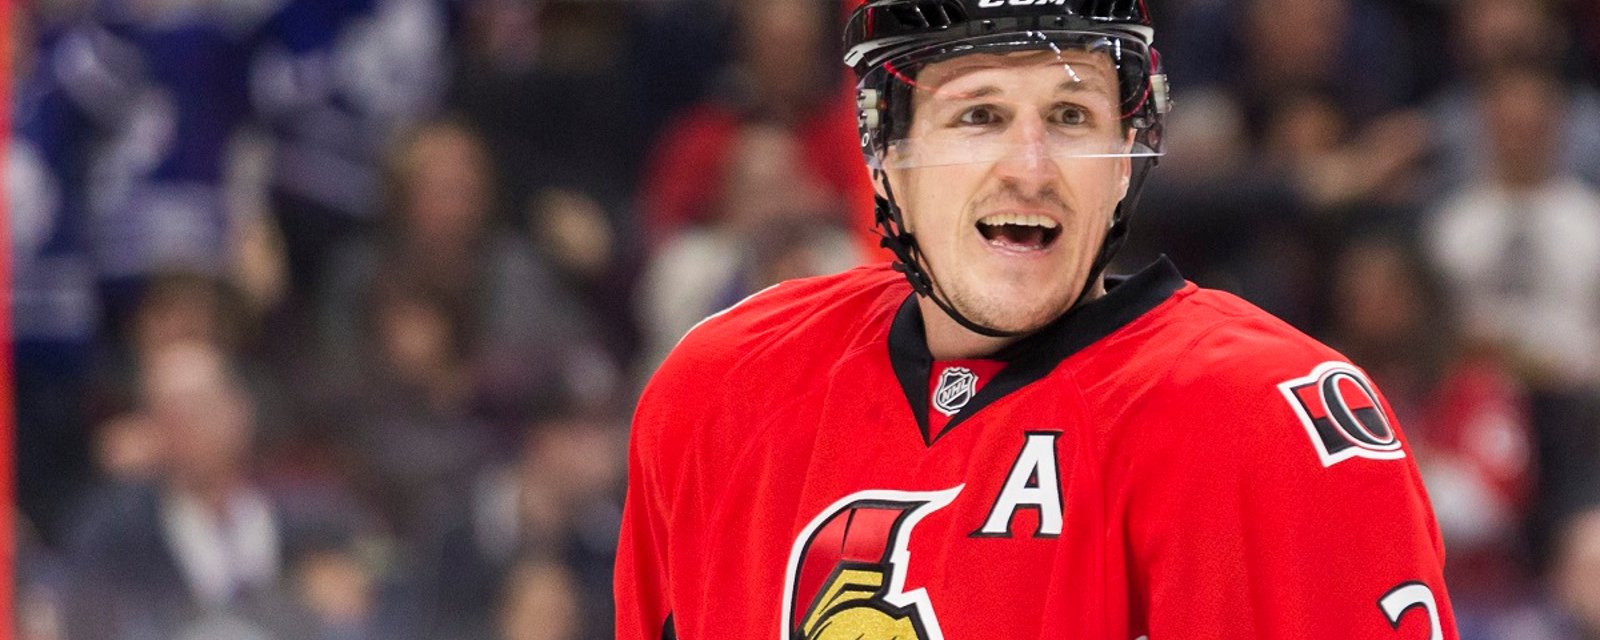 Breaking: Huge trade rumors involving Dion Phaneuf after refusing to waive for expansion draft.